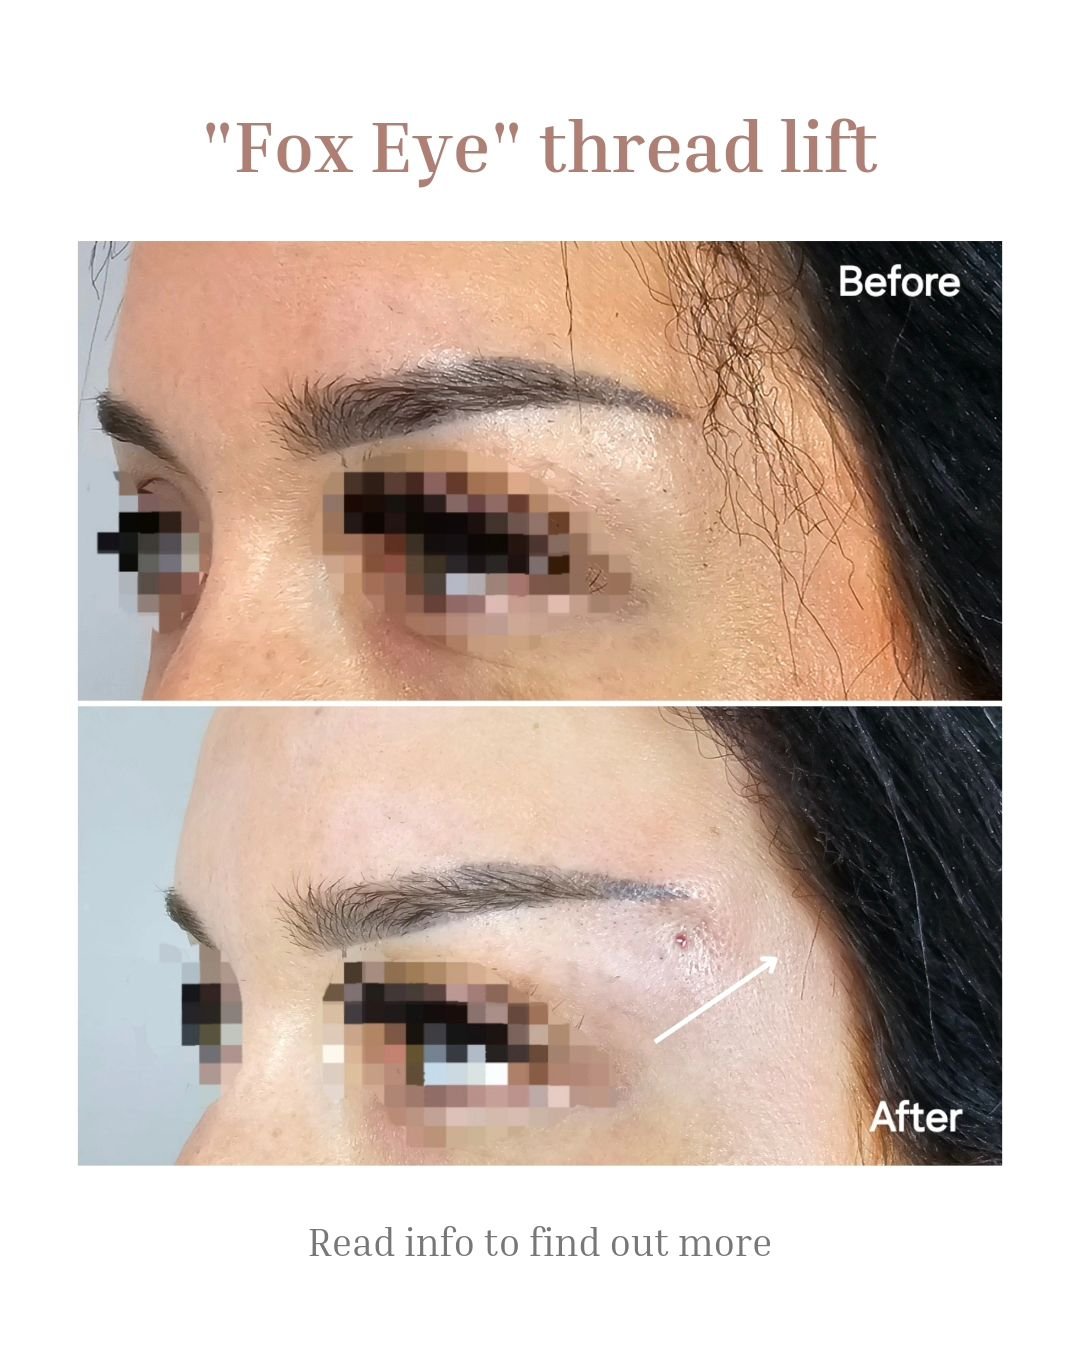 What is a FOX EYE thread lift? 🤔⬇️ 

A &quot;Fox Eye&quot; PDO Thread Lift is a cosmetic procedure designed to lift and shape the eyebrows and outer corners of the eyes. 👁 

It can create a lifted, elongated appearance reminiscent of a fox's eyes. 